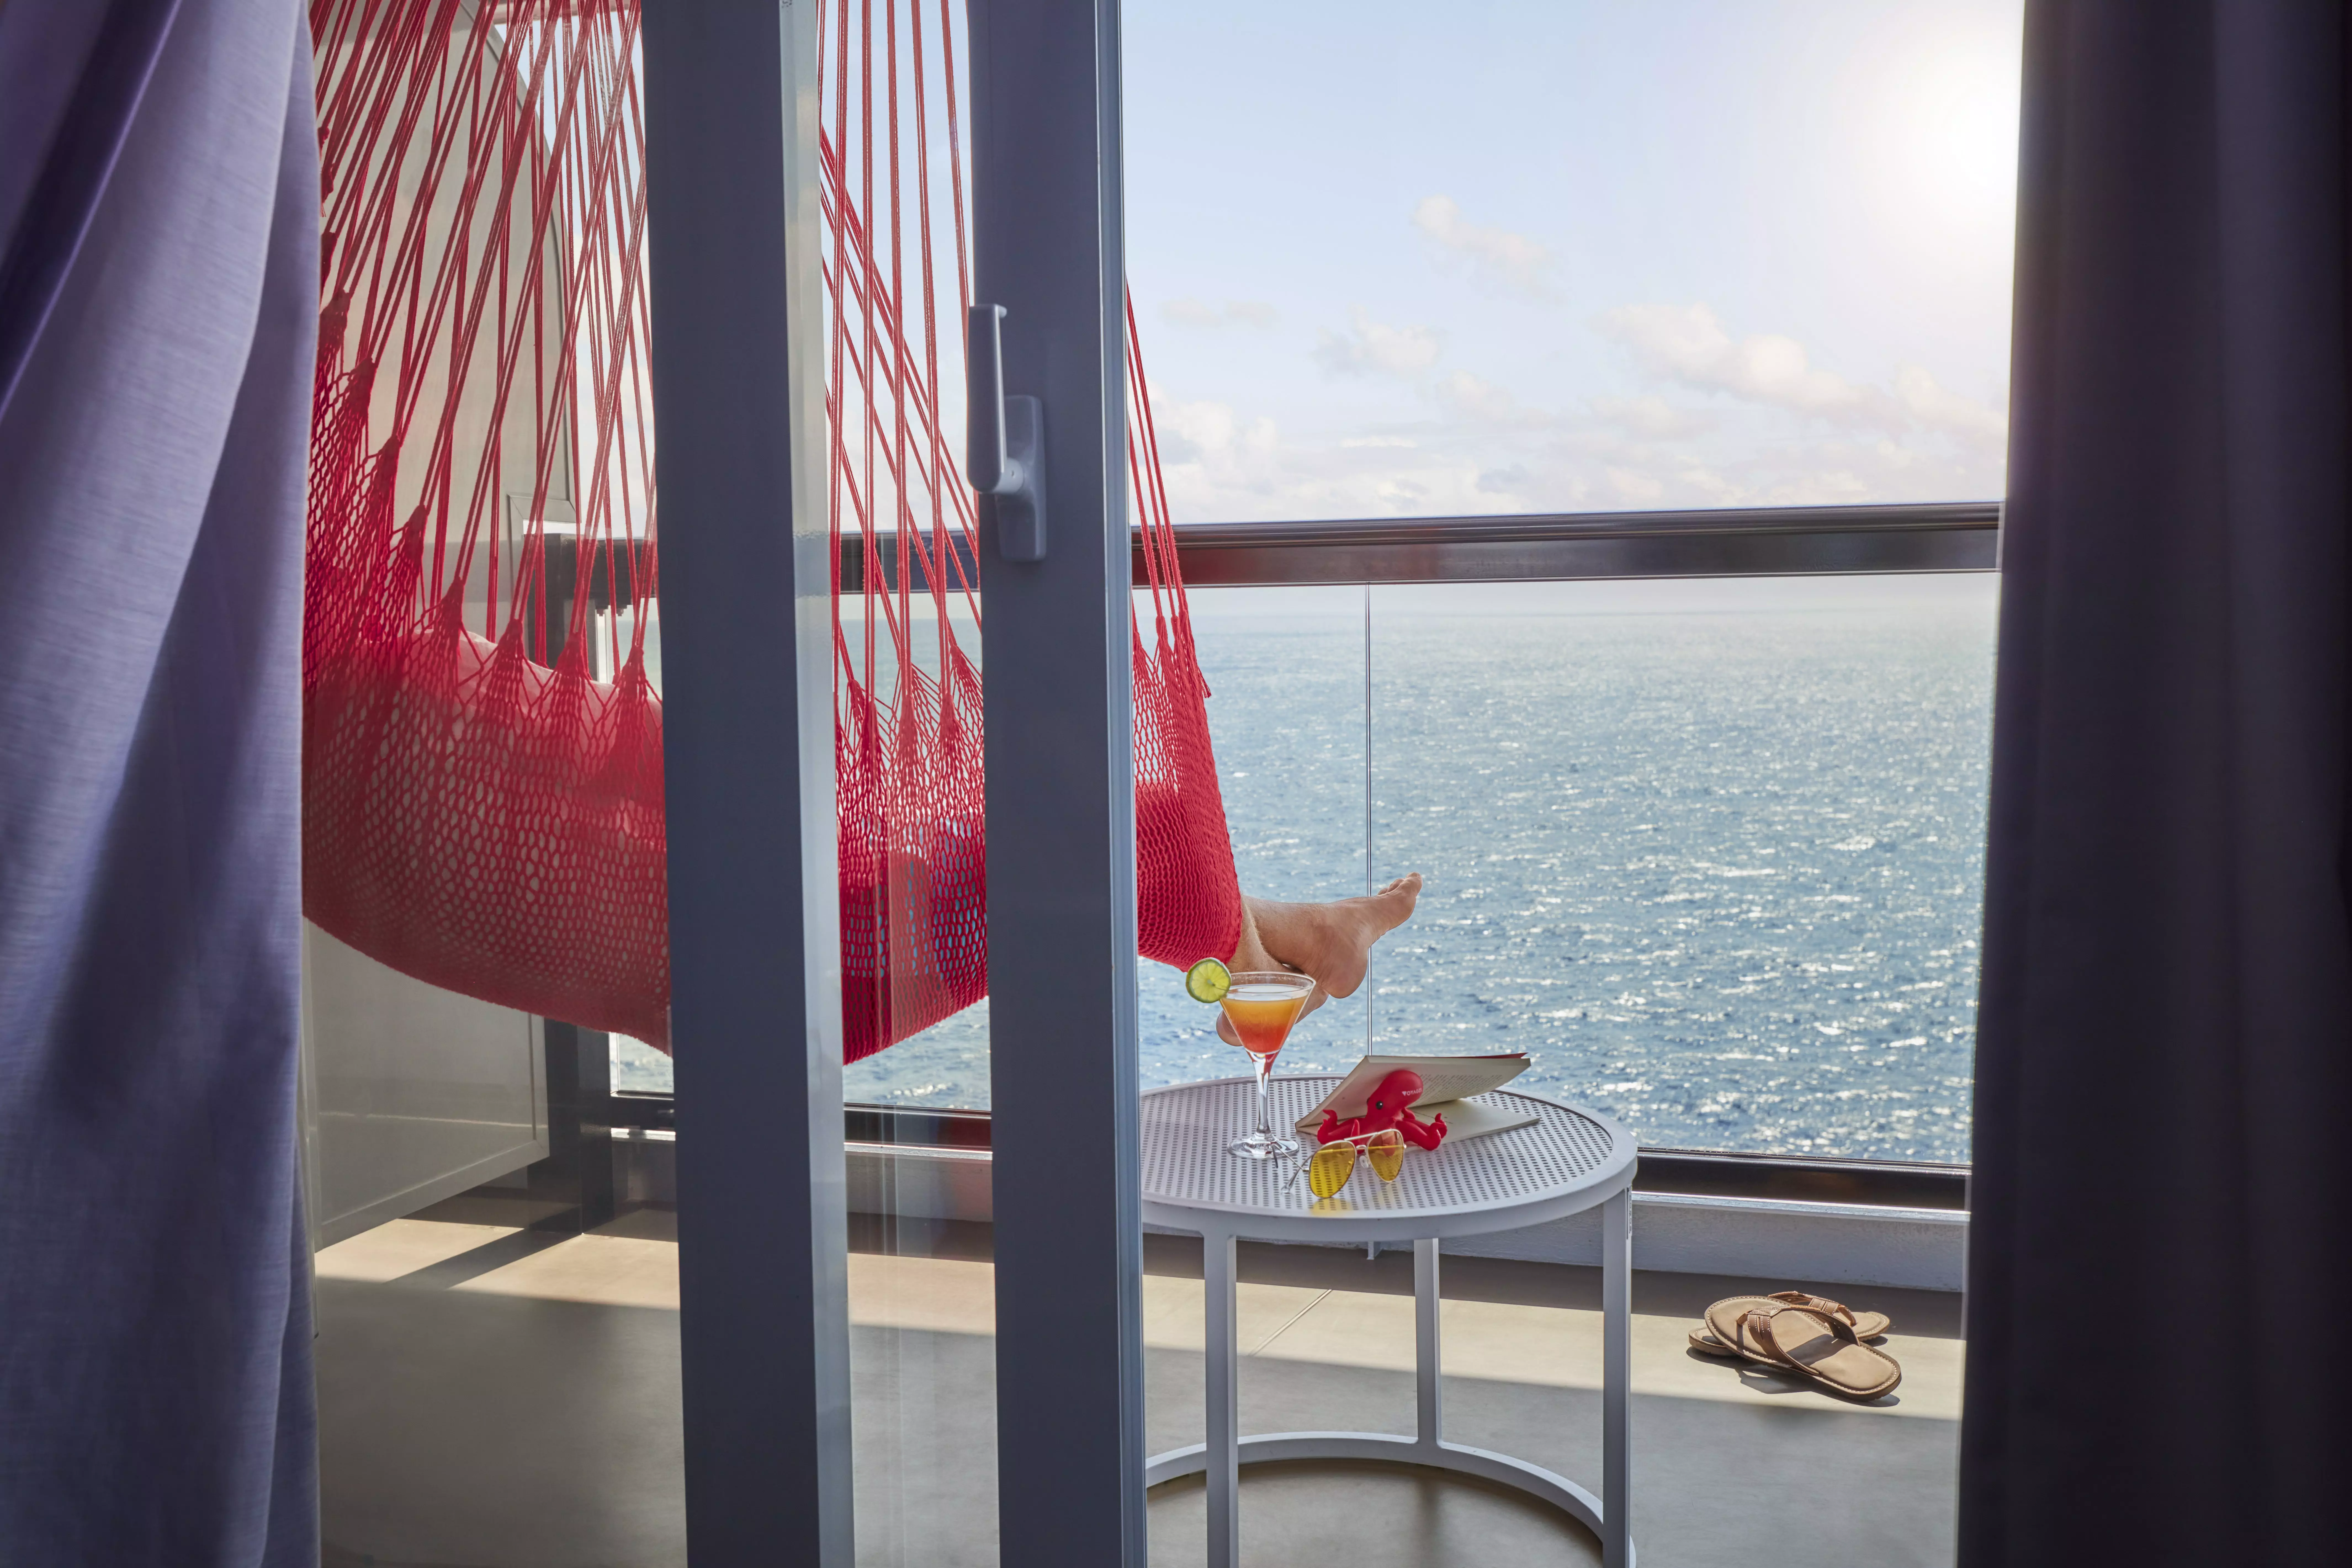 Red hammocks on the terrace are a signature Virgin Voyages amenity.